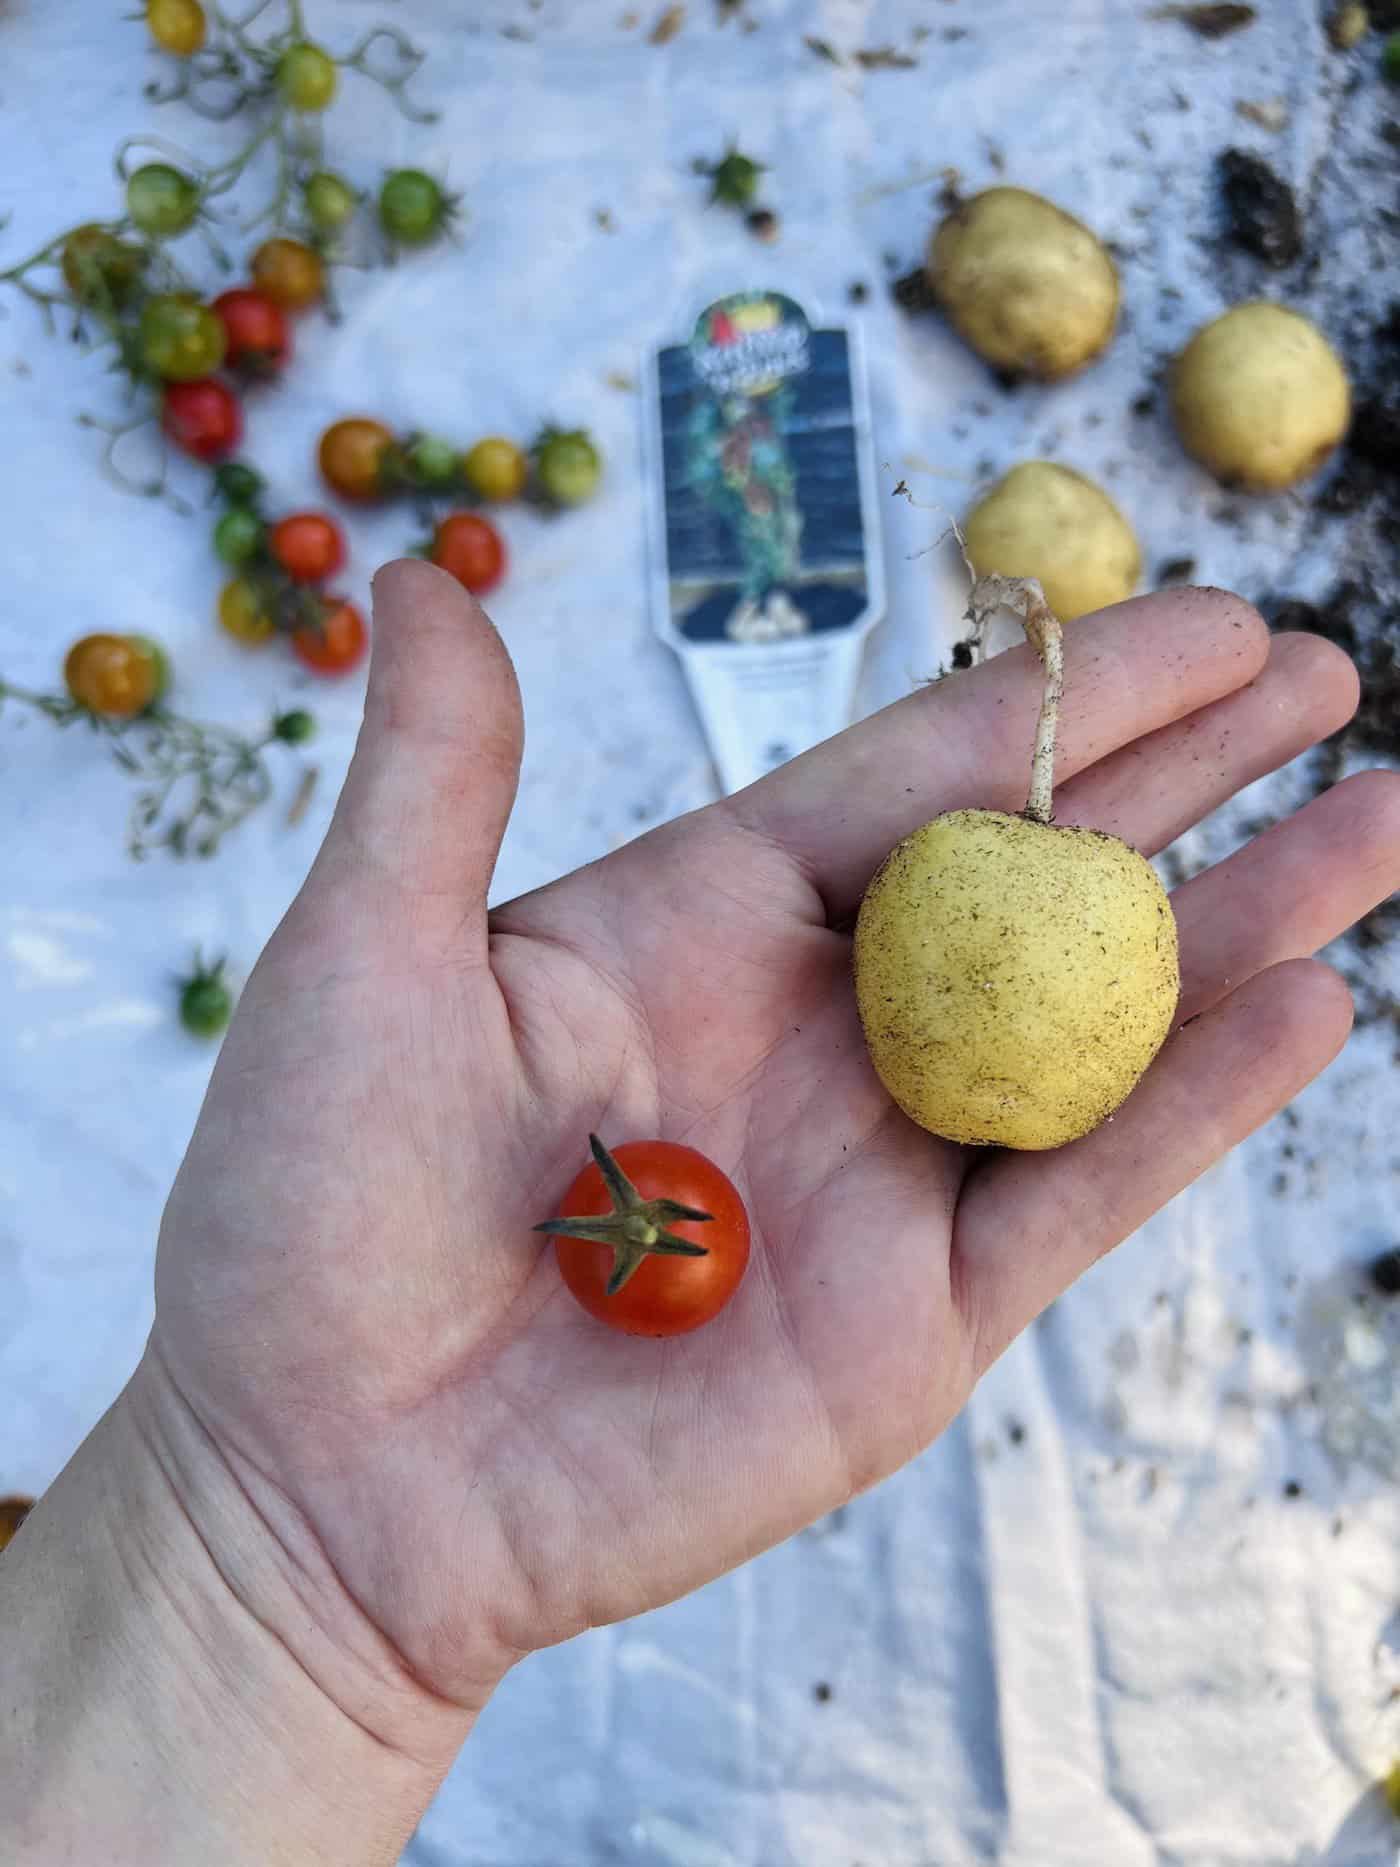 Tomato and potato from pomato plant - held in hand